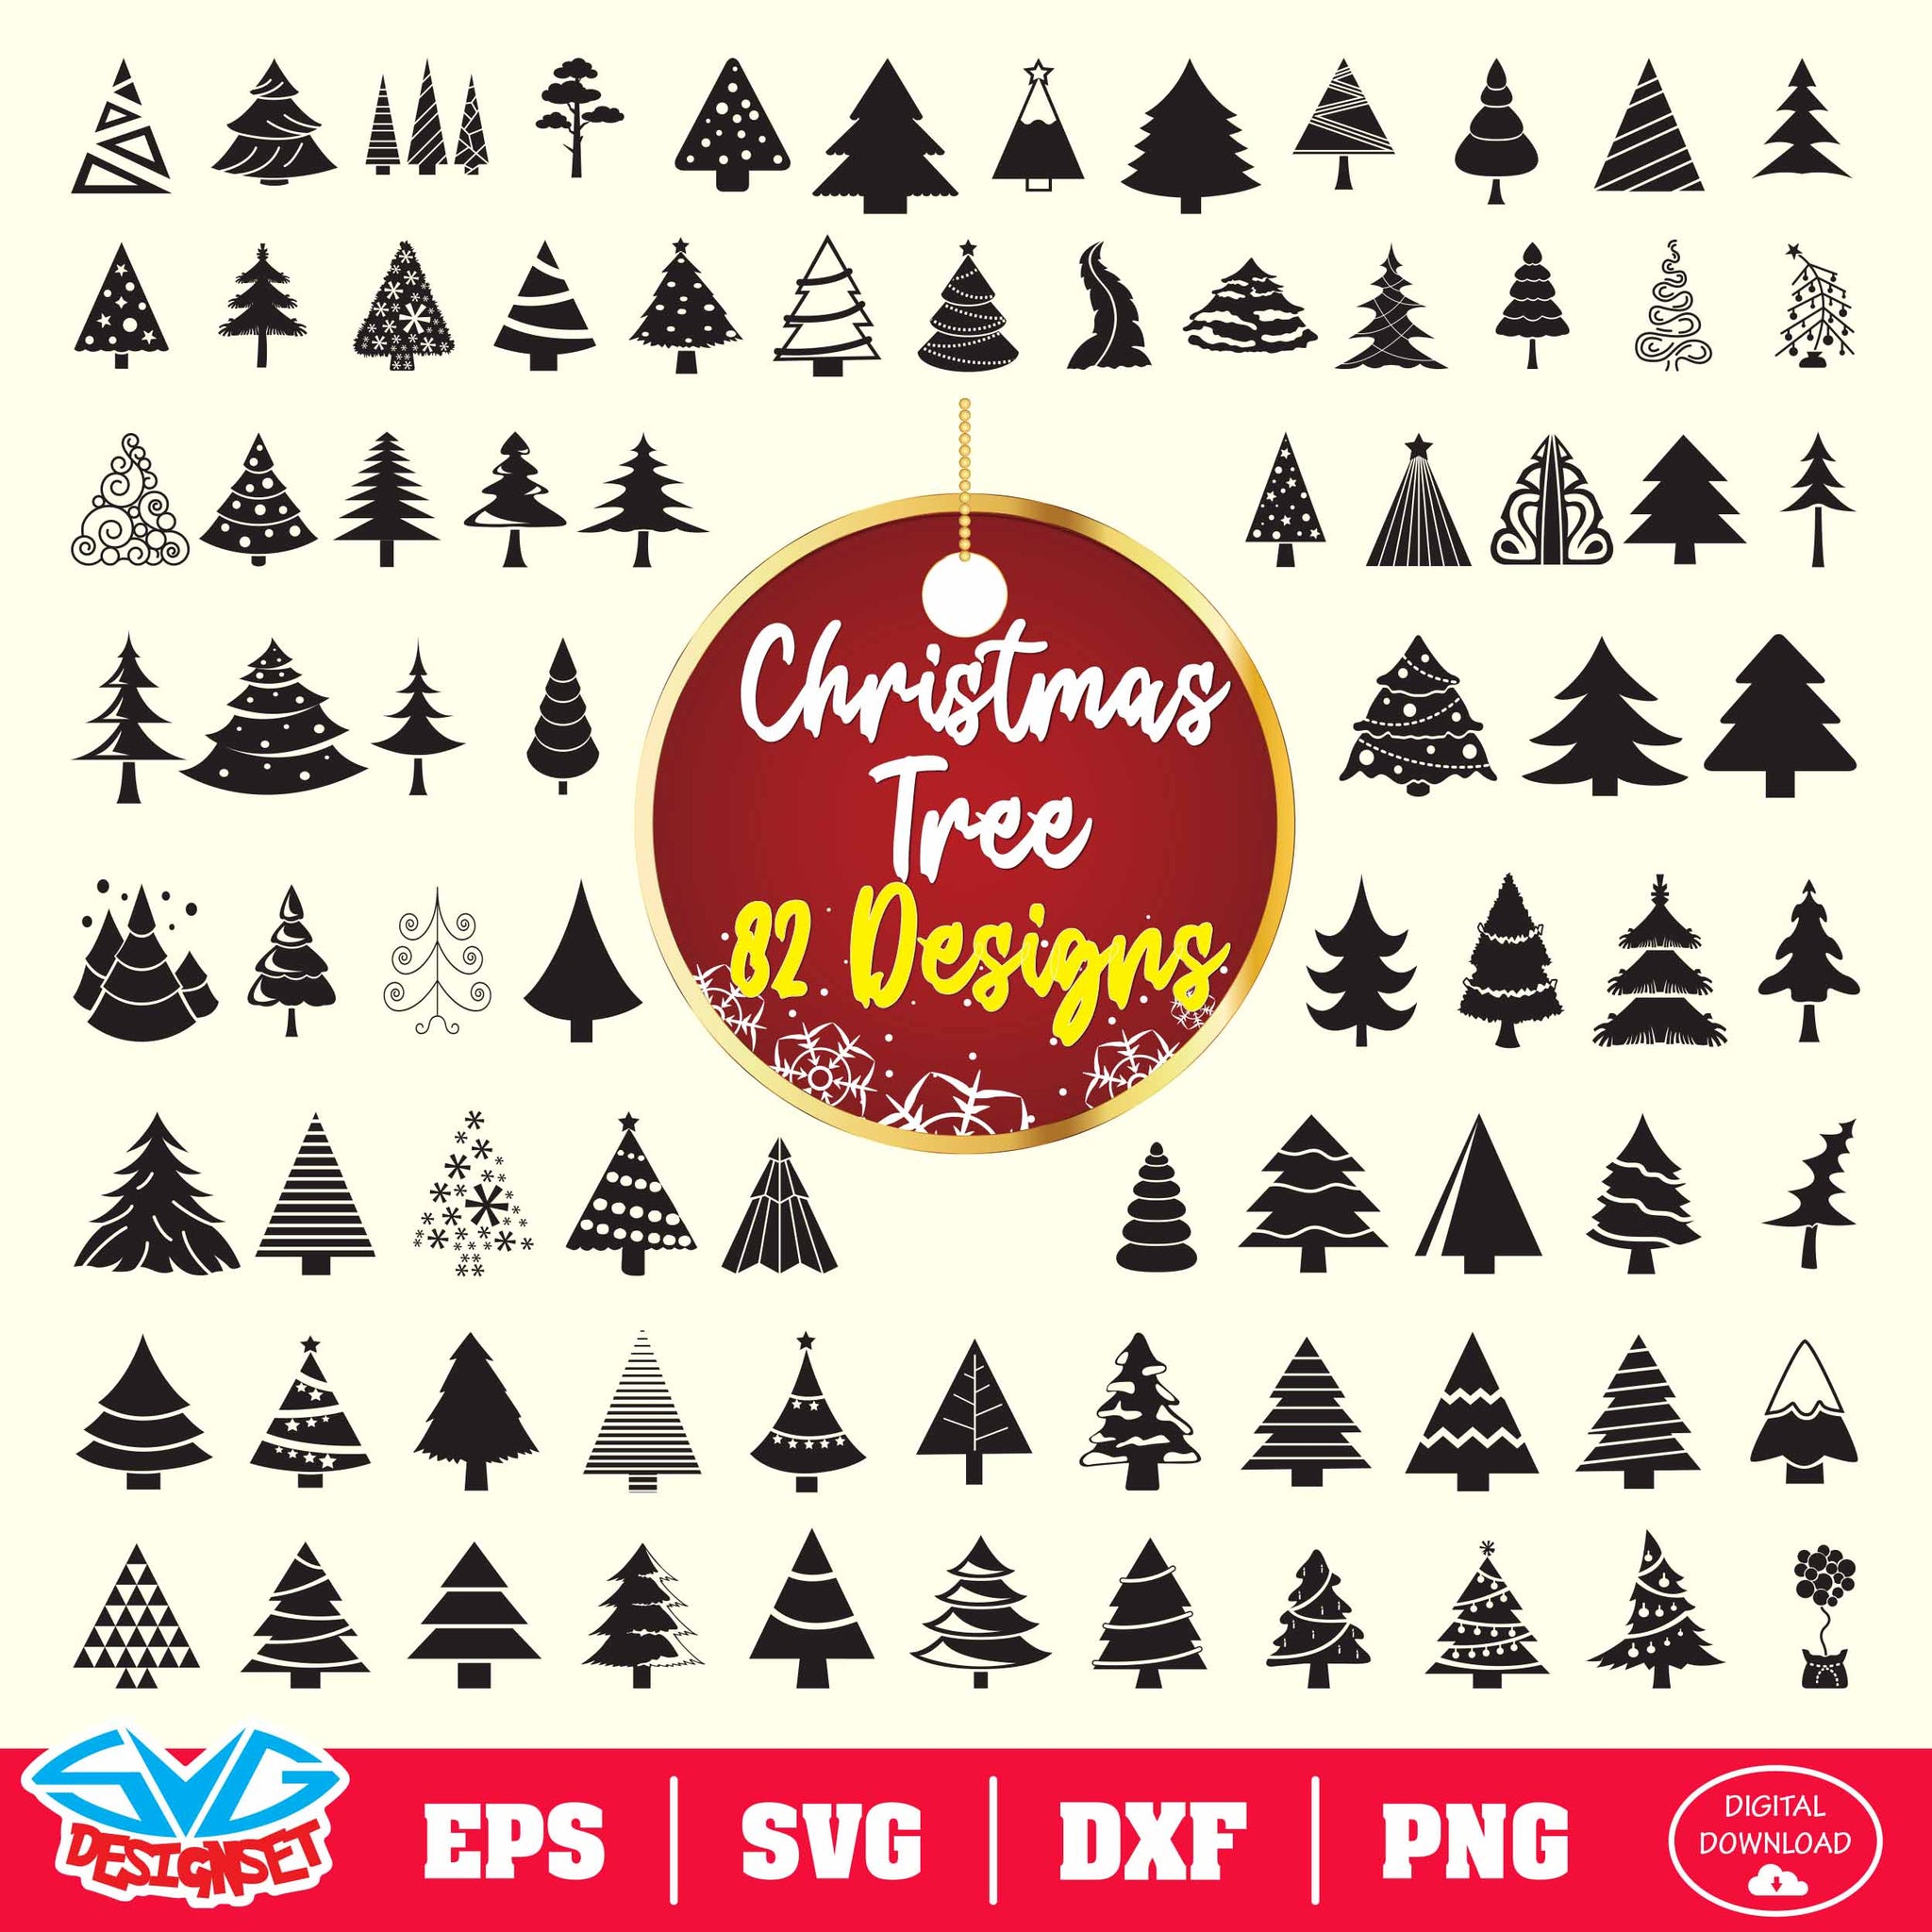 Christmas Tree Big Bundle Svg, Dxf, Eps, Png, Clipart, Silhouette and Cutfiles - SVGDesignSets